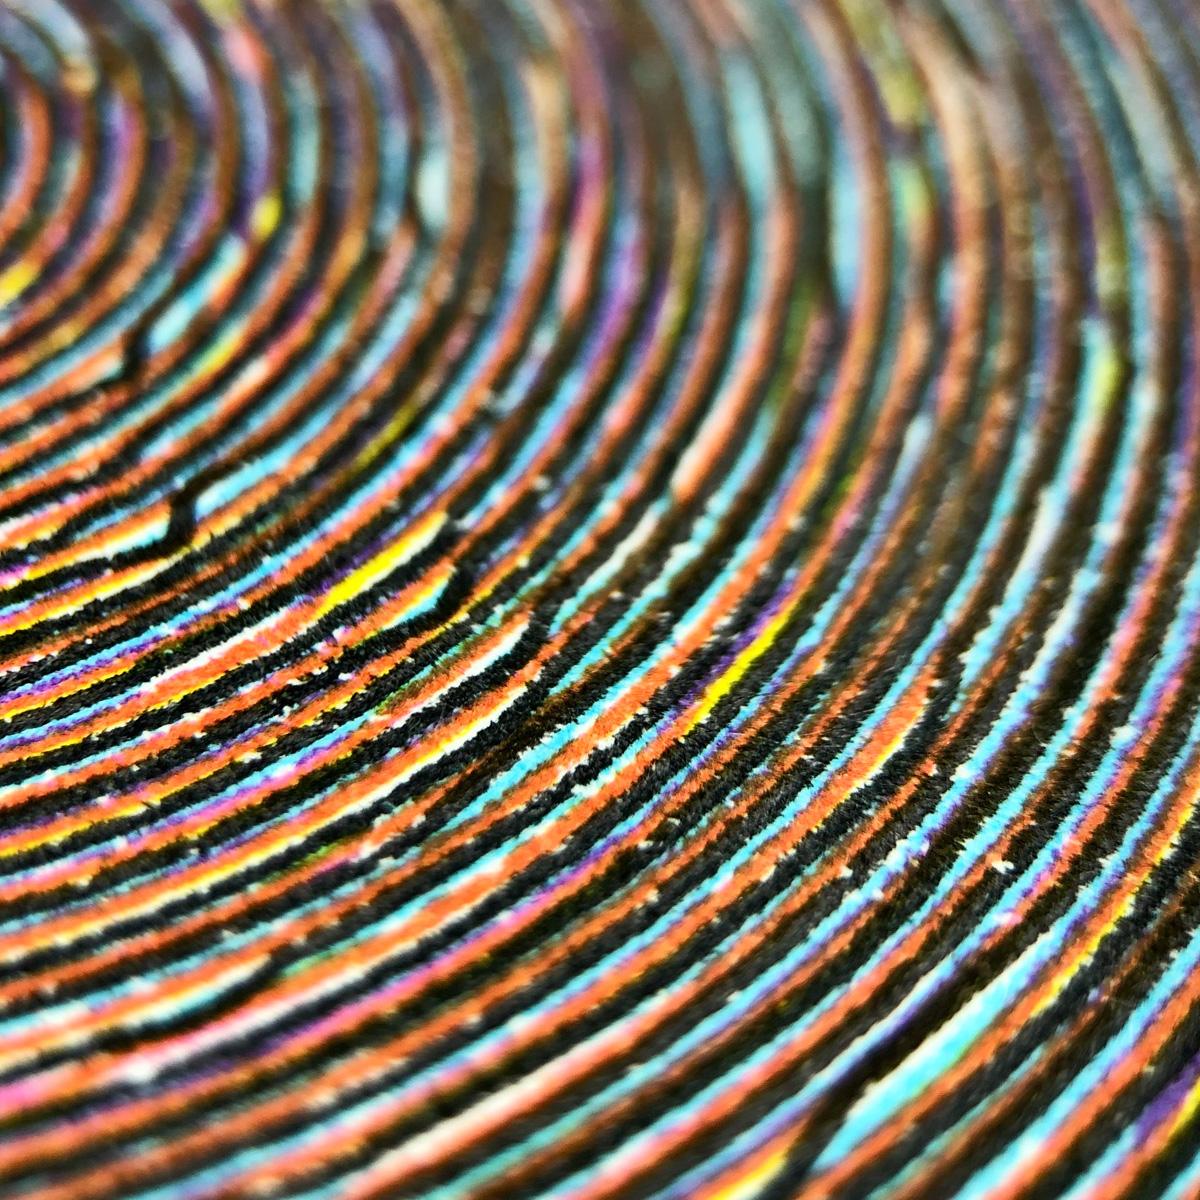 A closeup view showing a section of four overlapping spirals. Each spiral has a unique “wobble”, creating interesting texture and colour combinations